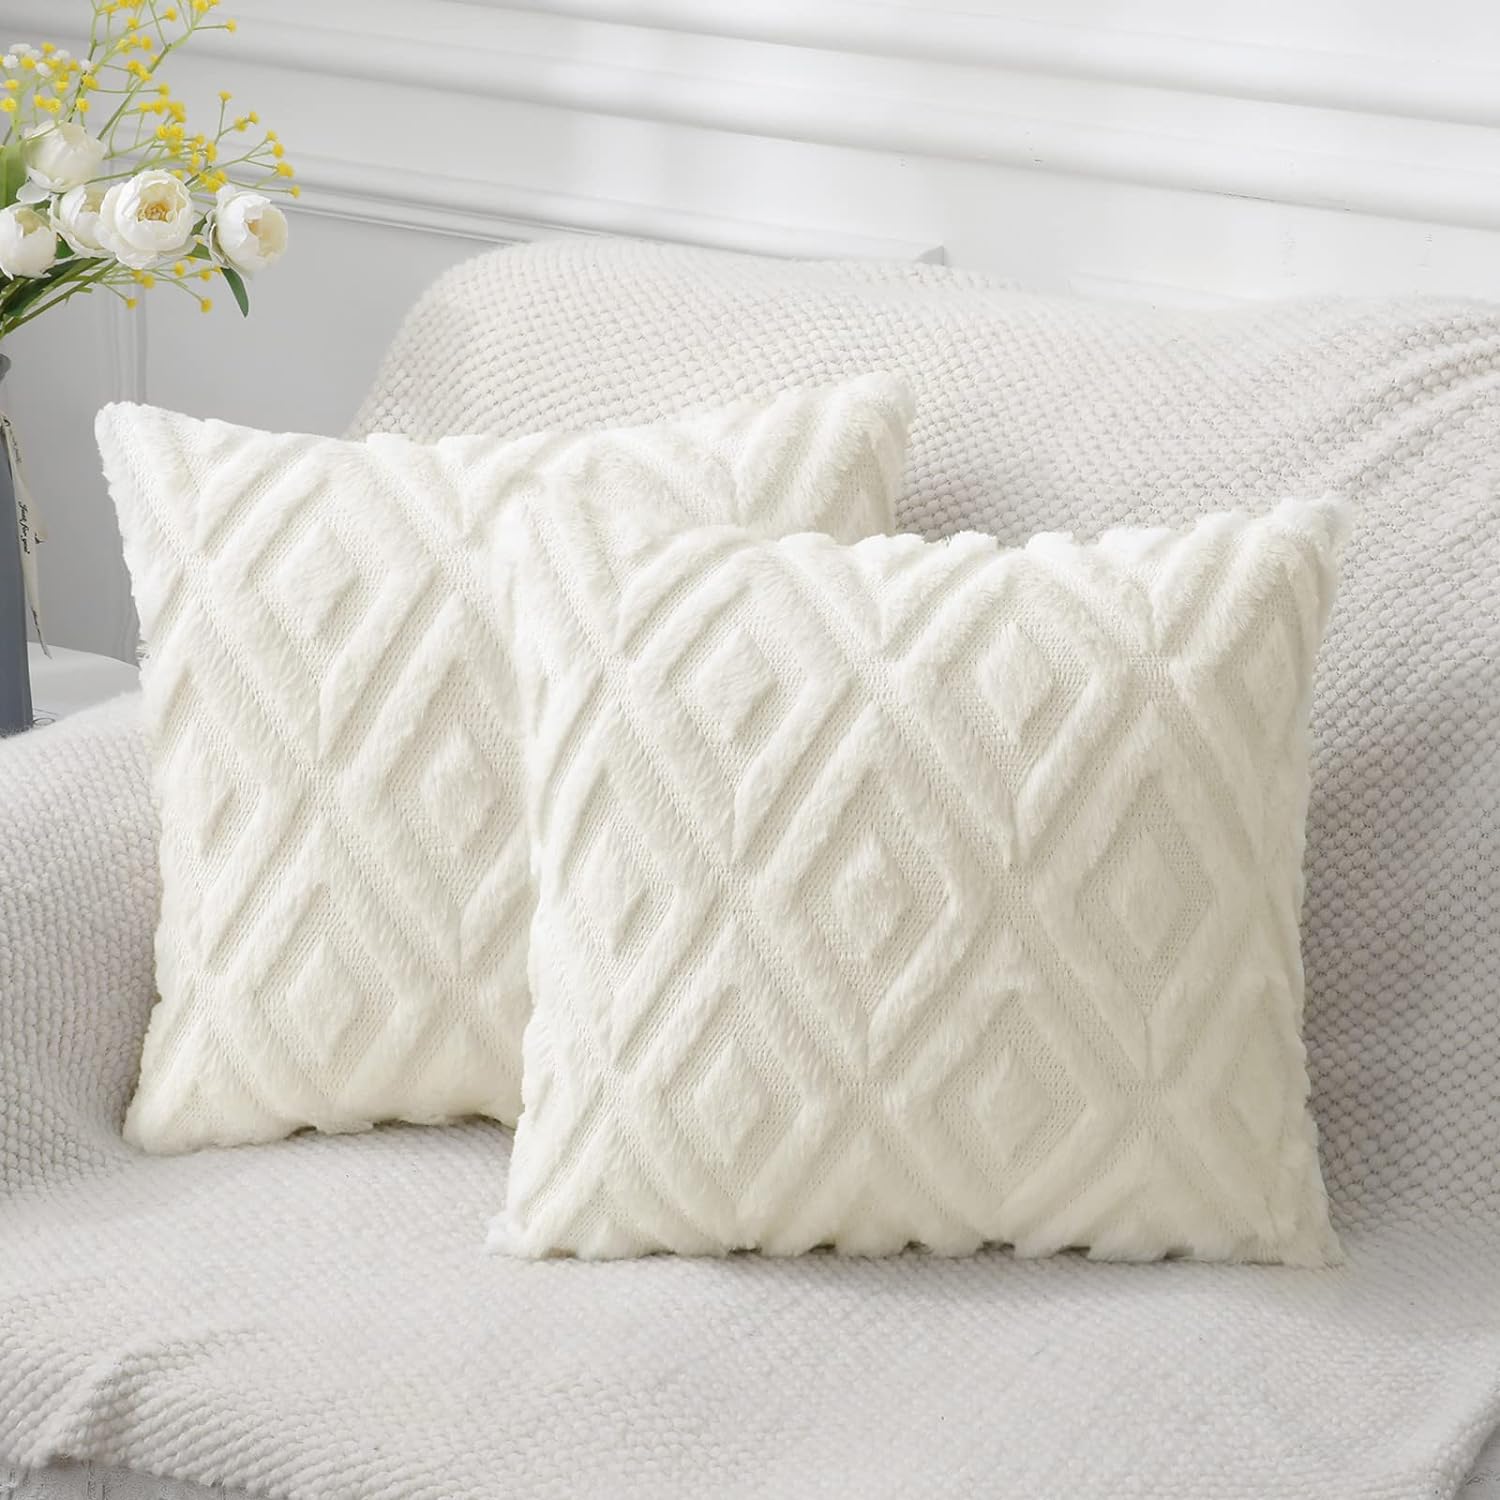 Pallene Soft Faux Fur Throw Pillow Covers 18x18 - Plush Short Wool Velvet Decorative Pillow Covers - Couch Sofa Pillow Covers for Living Room - with 3D Diamond Pattern - Set of 2 - Cream White